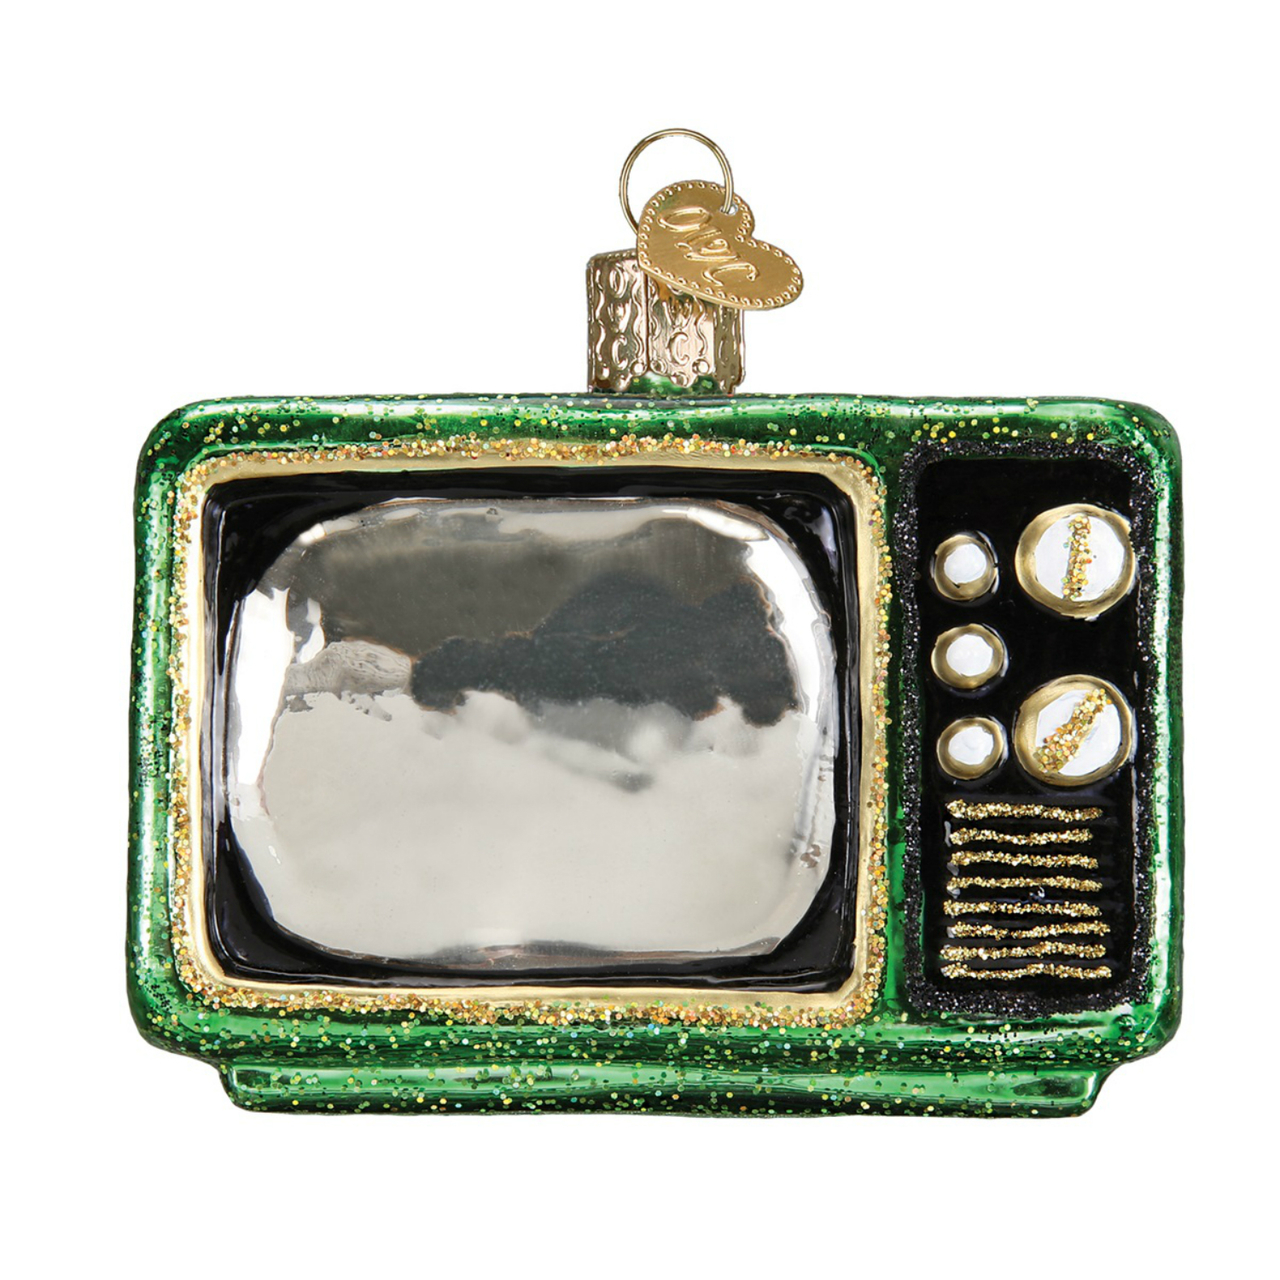 Retro Look Tube TV Christmas Holiday Ornament Glass 2.5 Inches